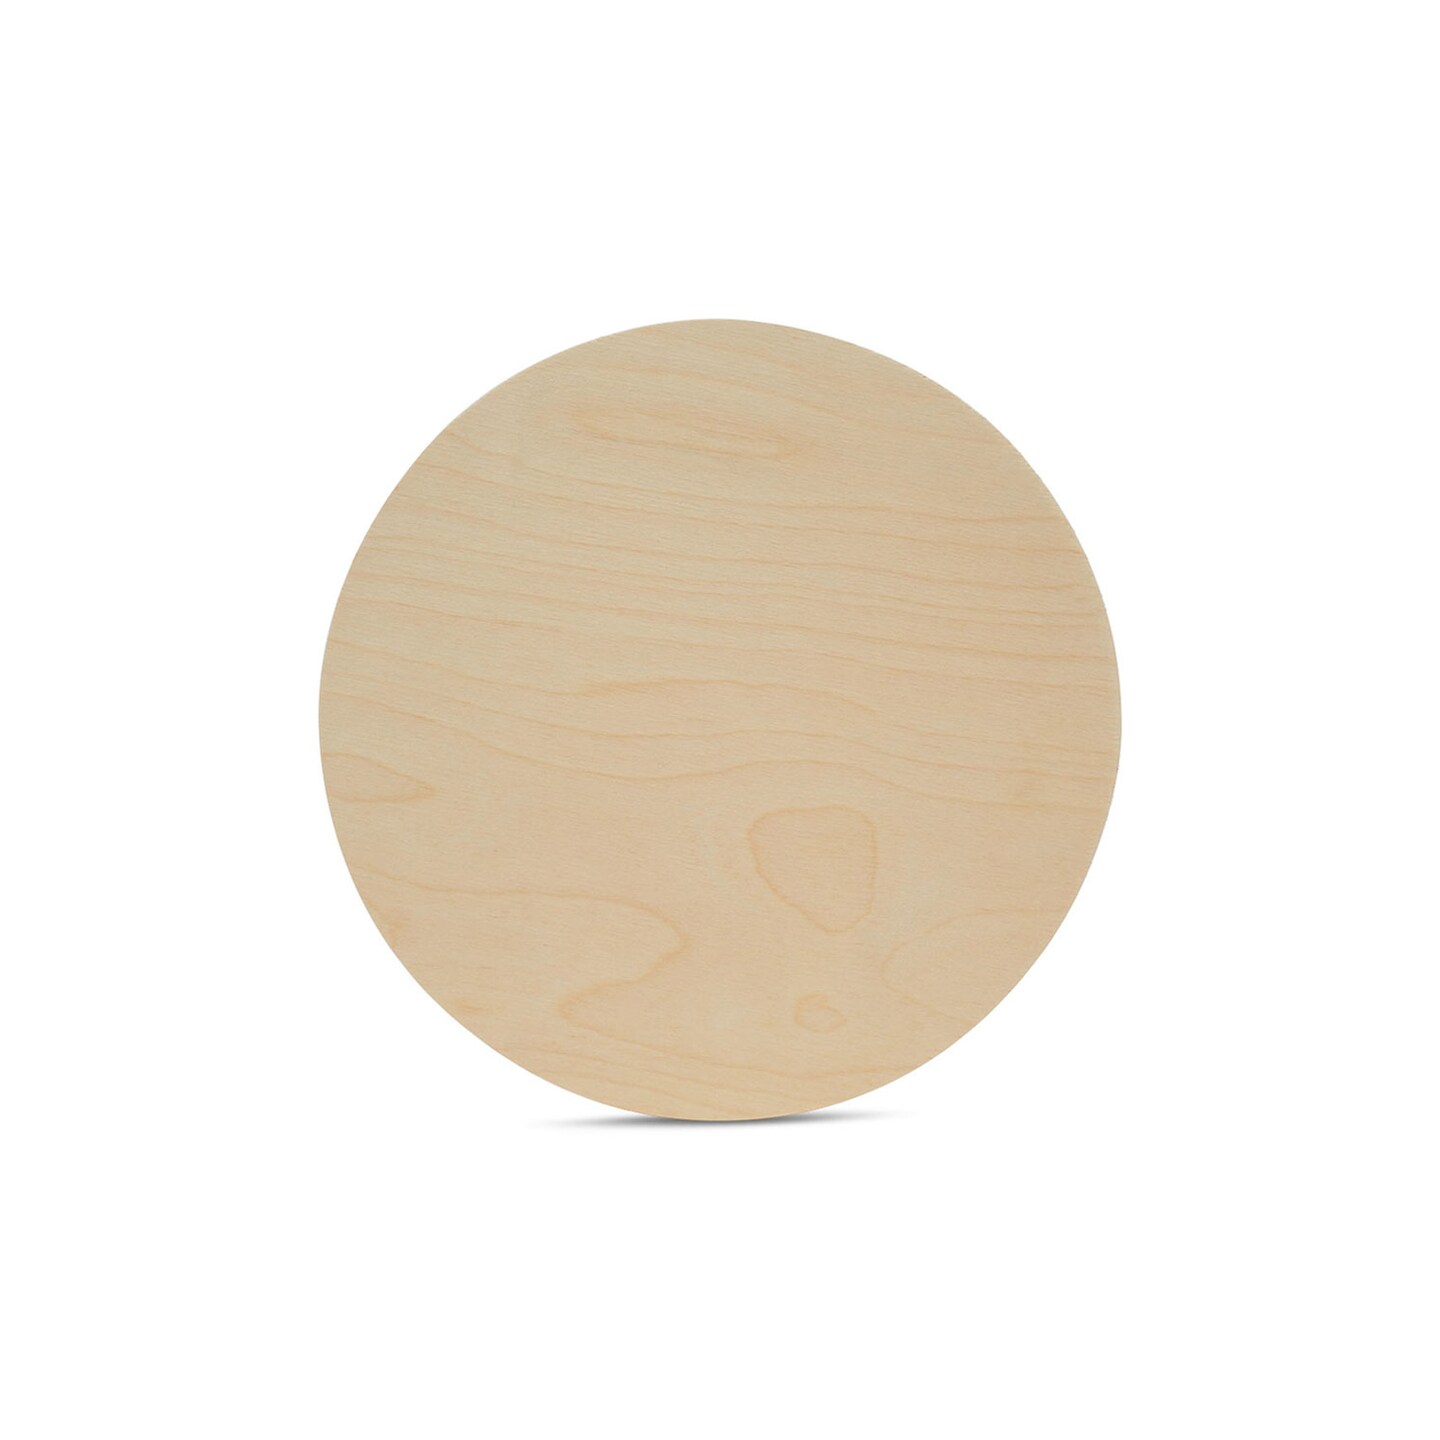 Wood Circles 20 inch 1/2 inch Thick, Unfinished Birch Plaques, Pack of 1 20  inch Wooden Circle for Crafts and Blank Sign Rounds, by Woodpeckers